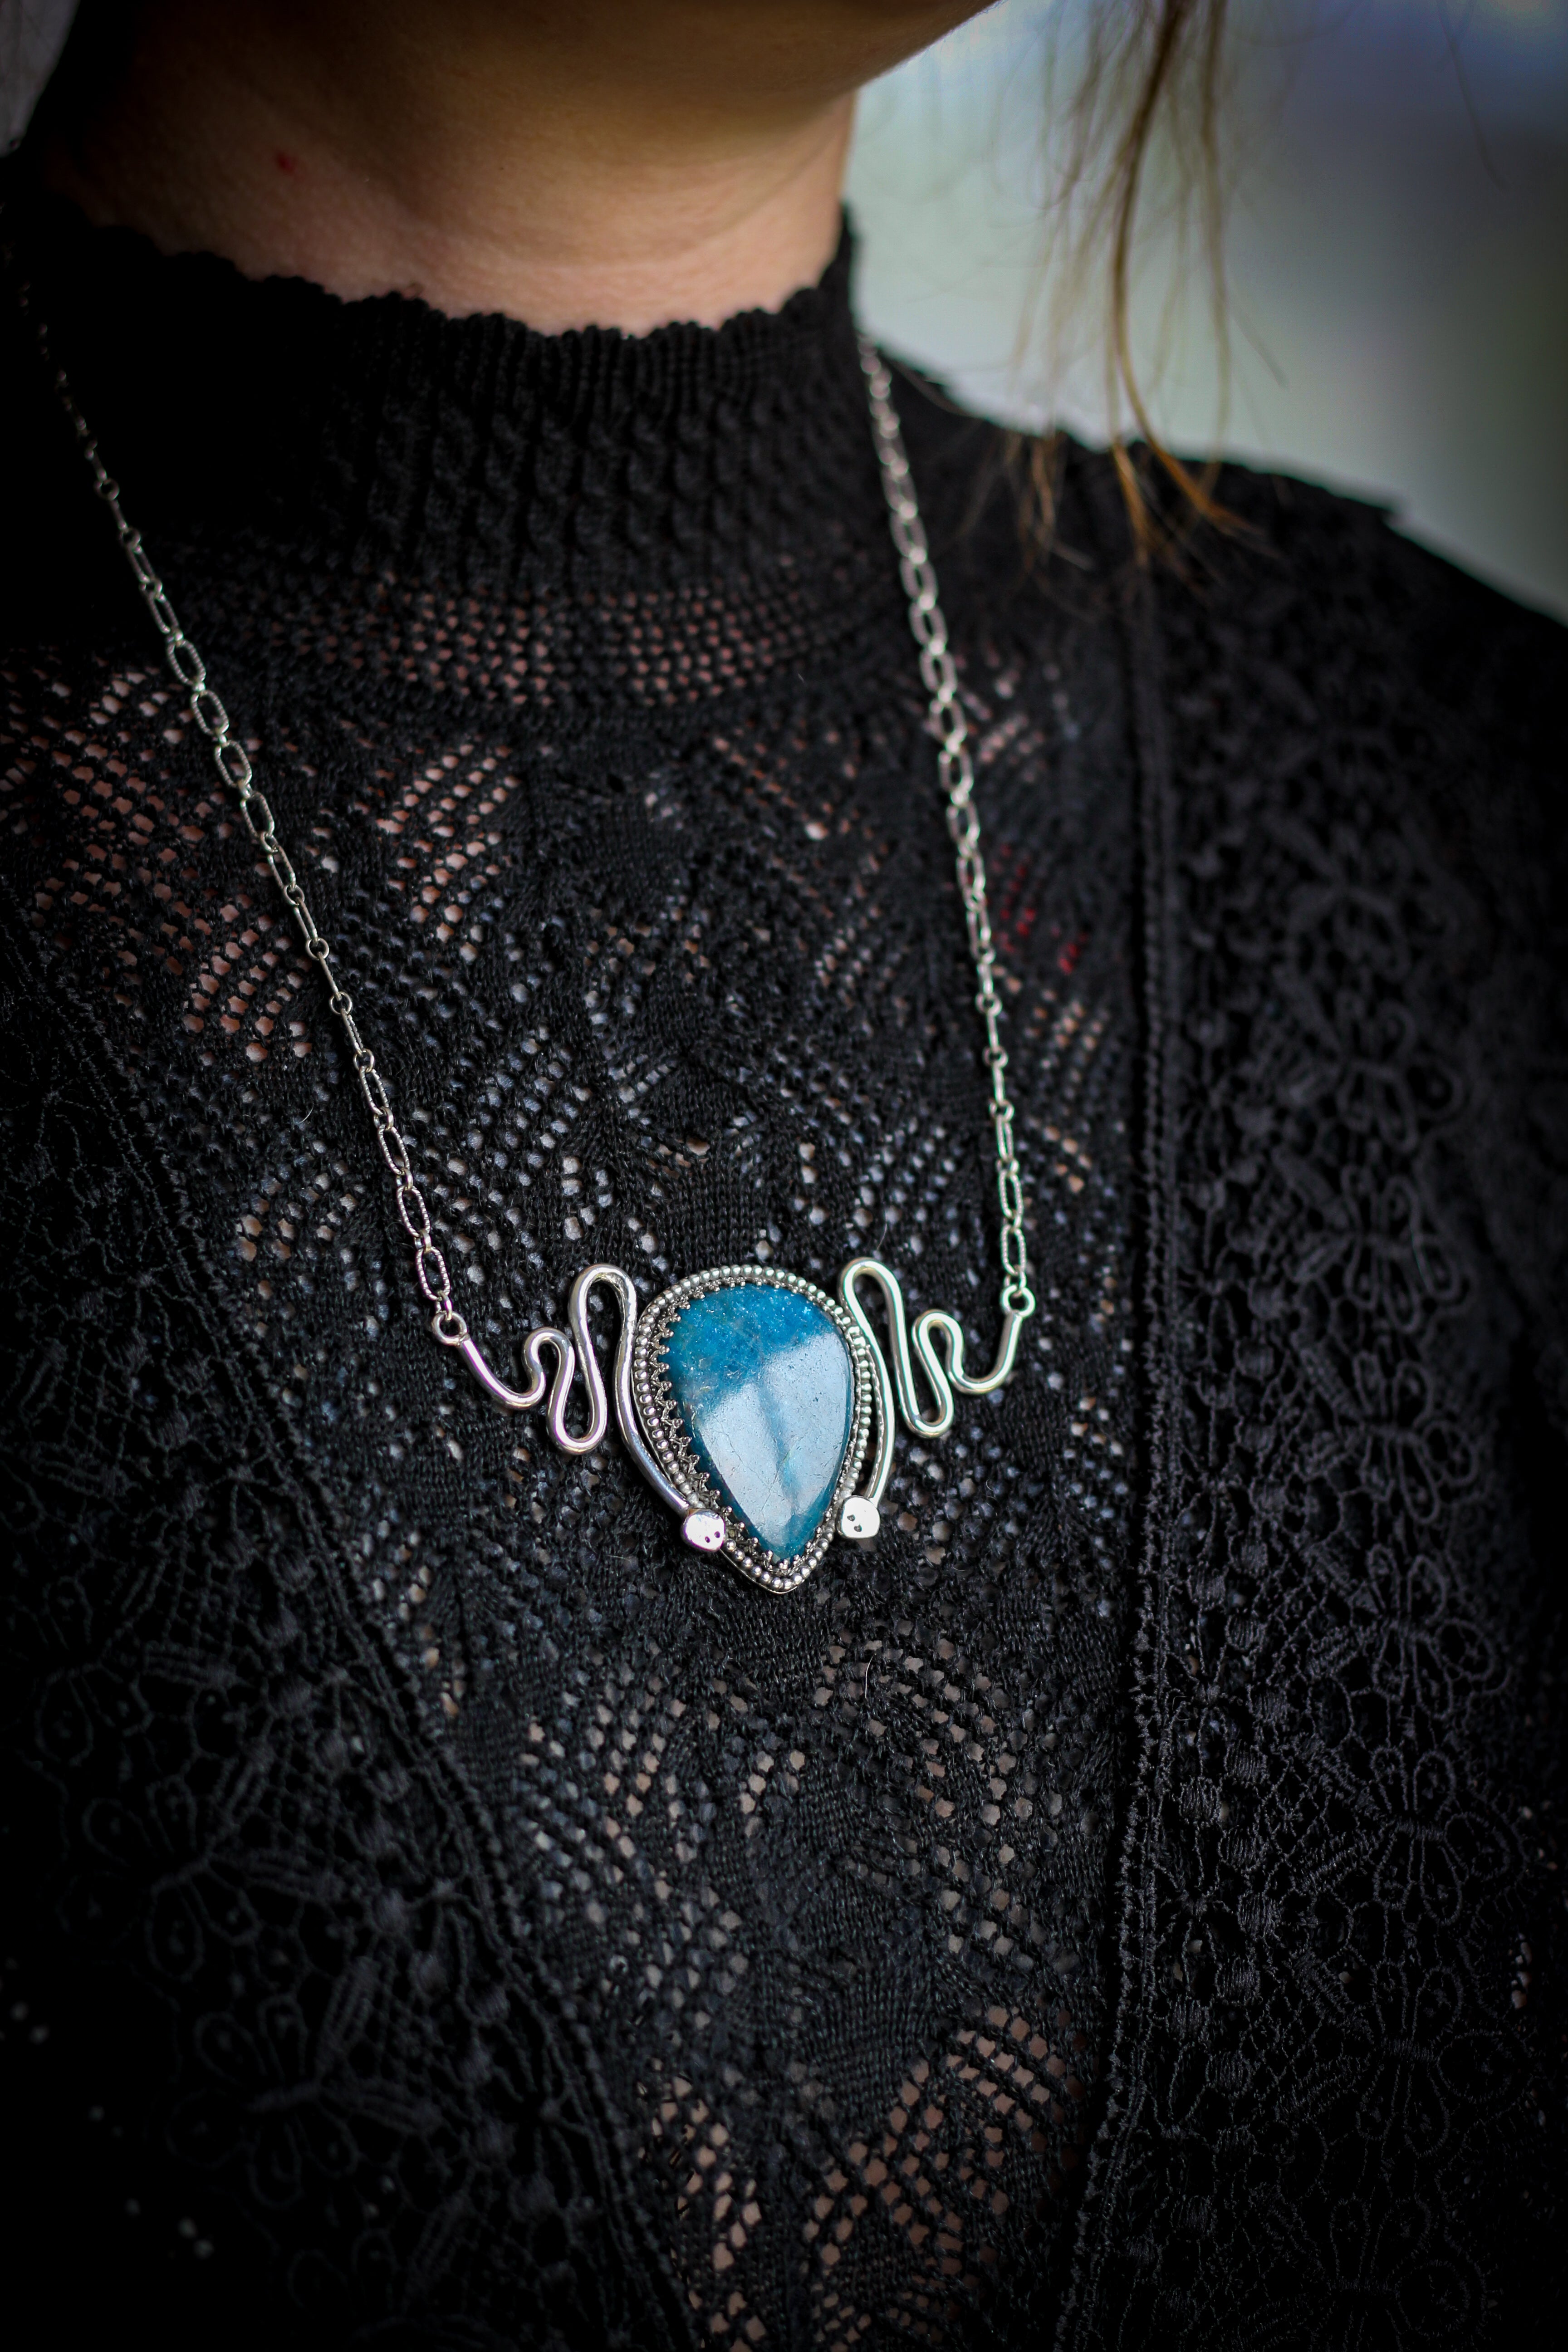 The Snake Goddess - Apatite and silver necklace, forged snakes